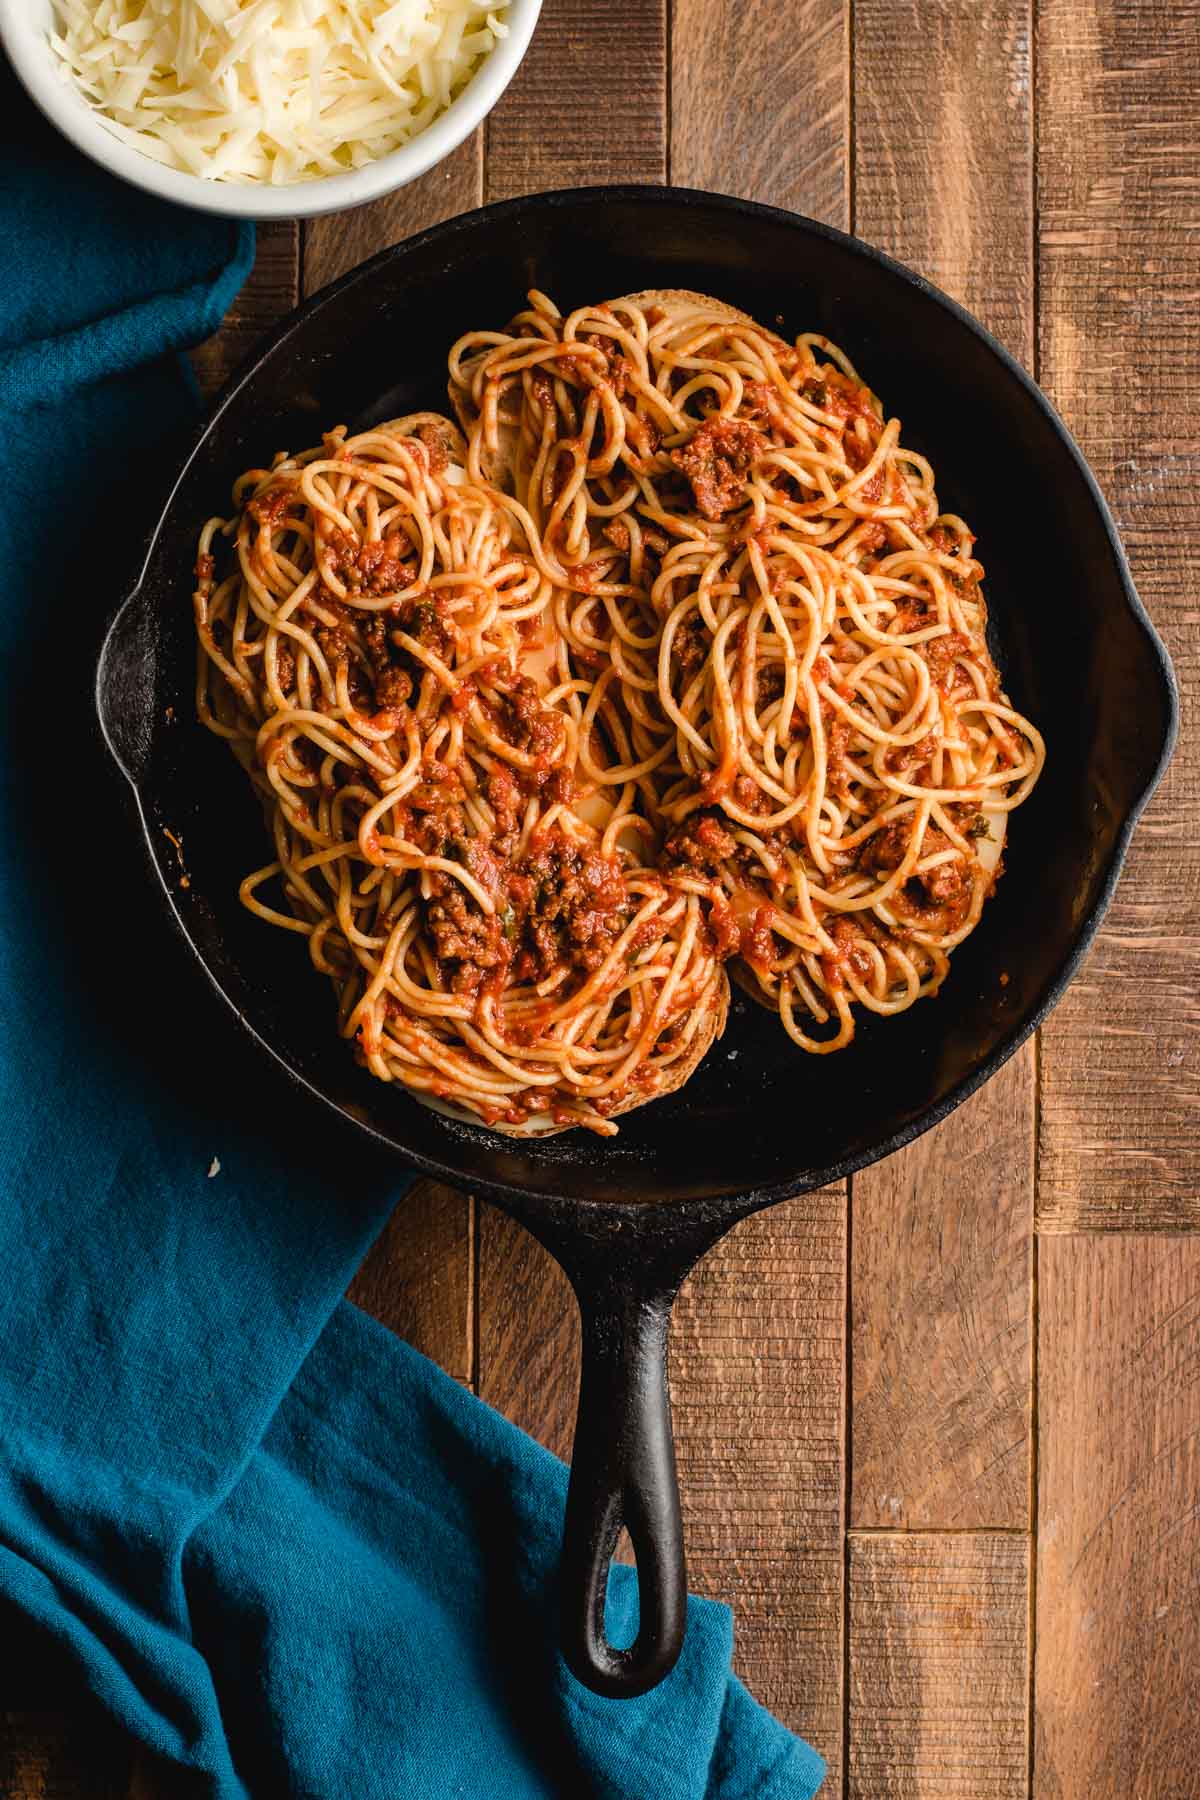 Cast iron skillet with two grilled cheeses topped with spaghetti.